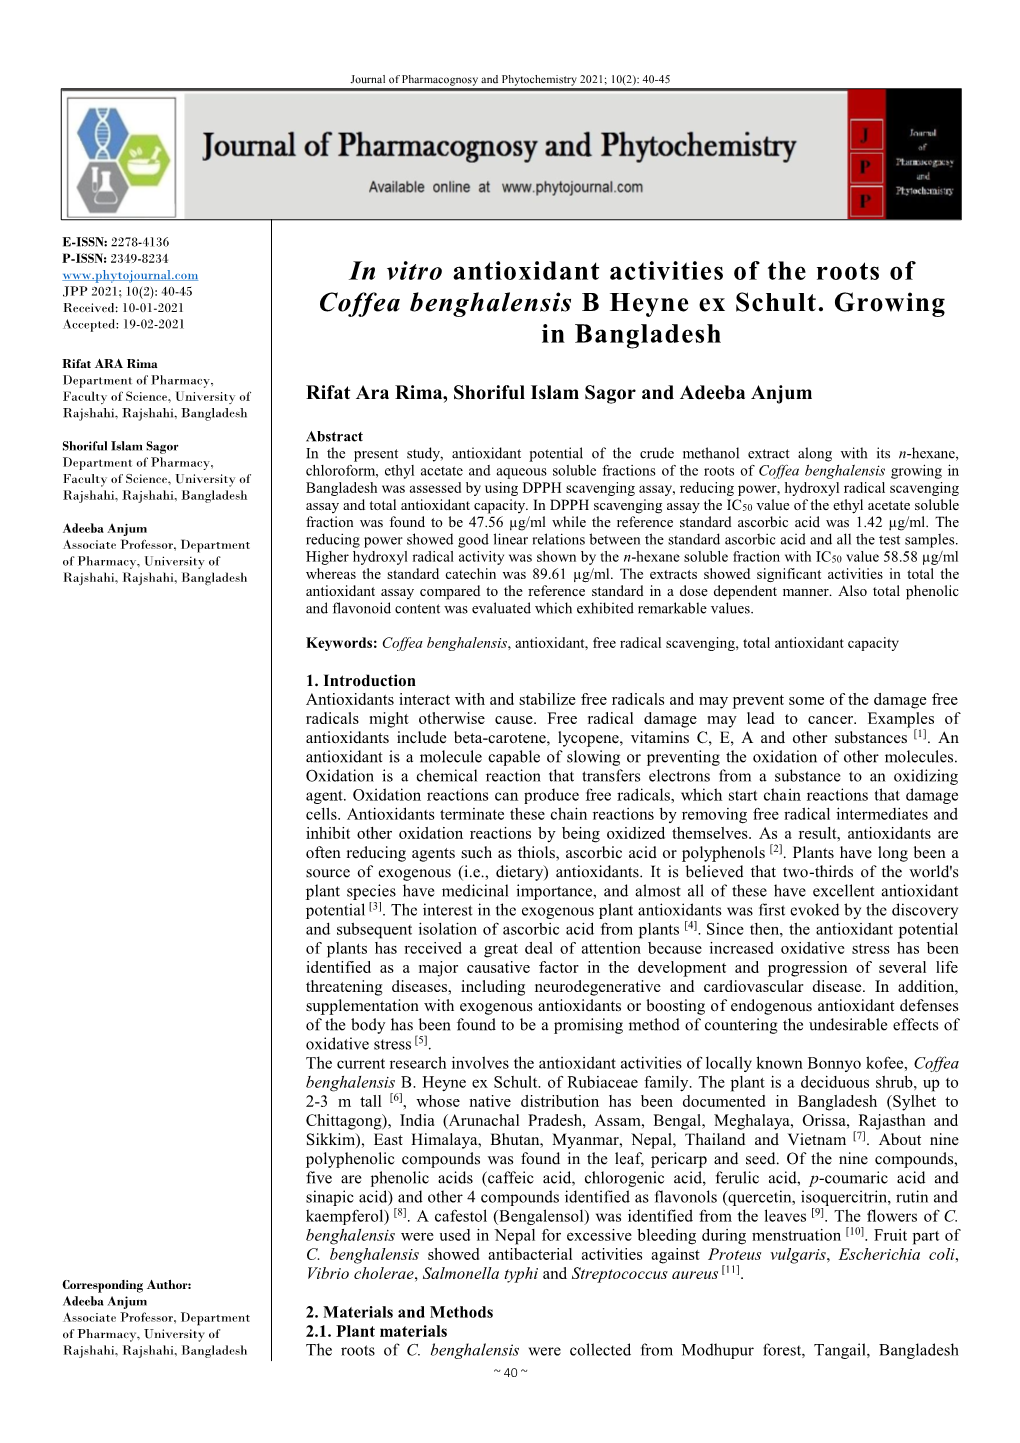 In Vitro Antioxidant Activities of the Roots of Coffea Benghalensis B